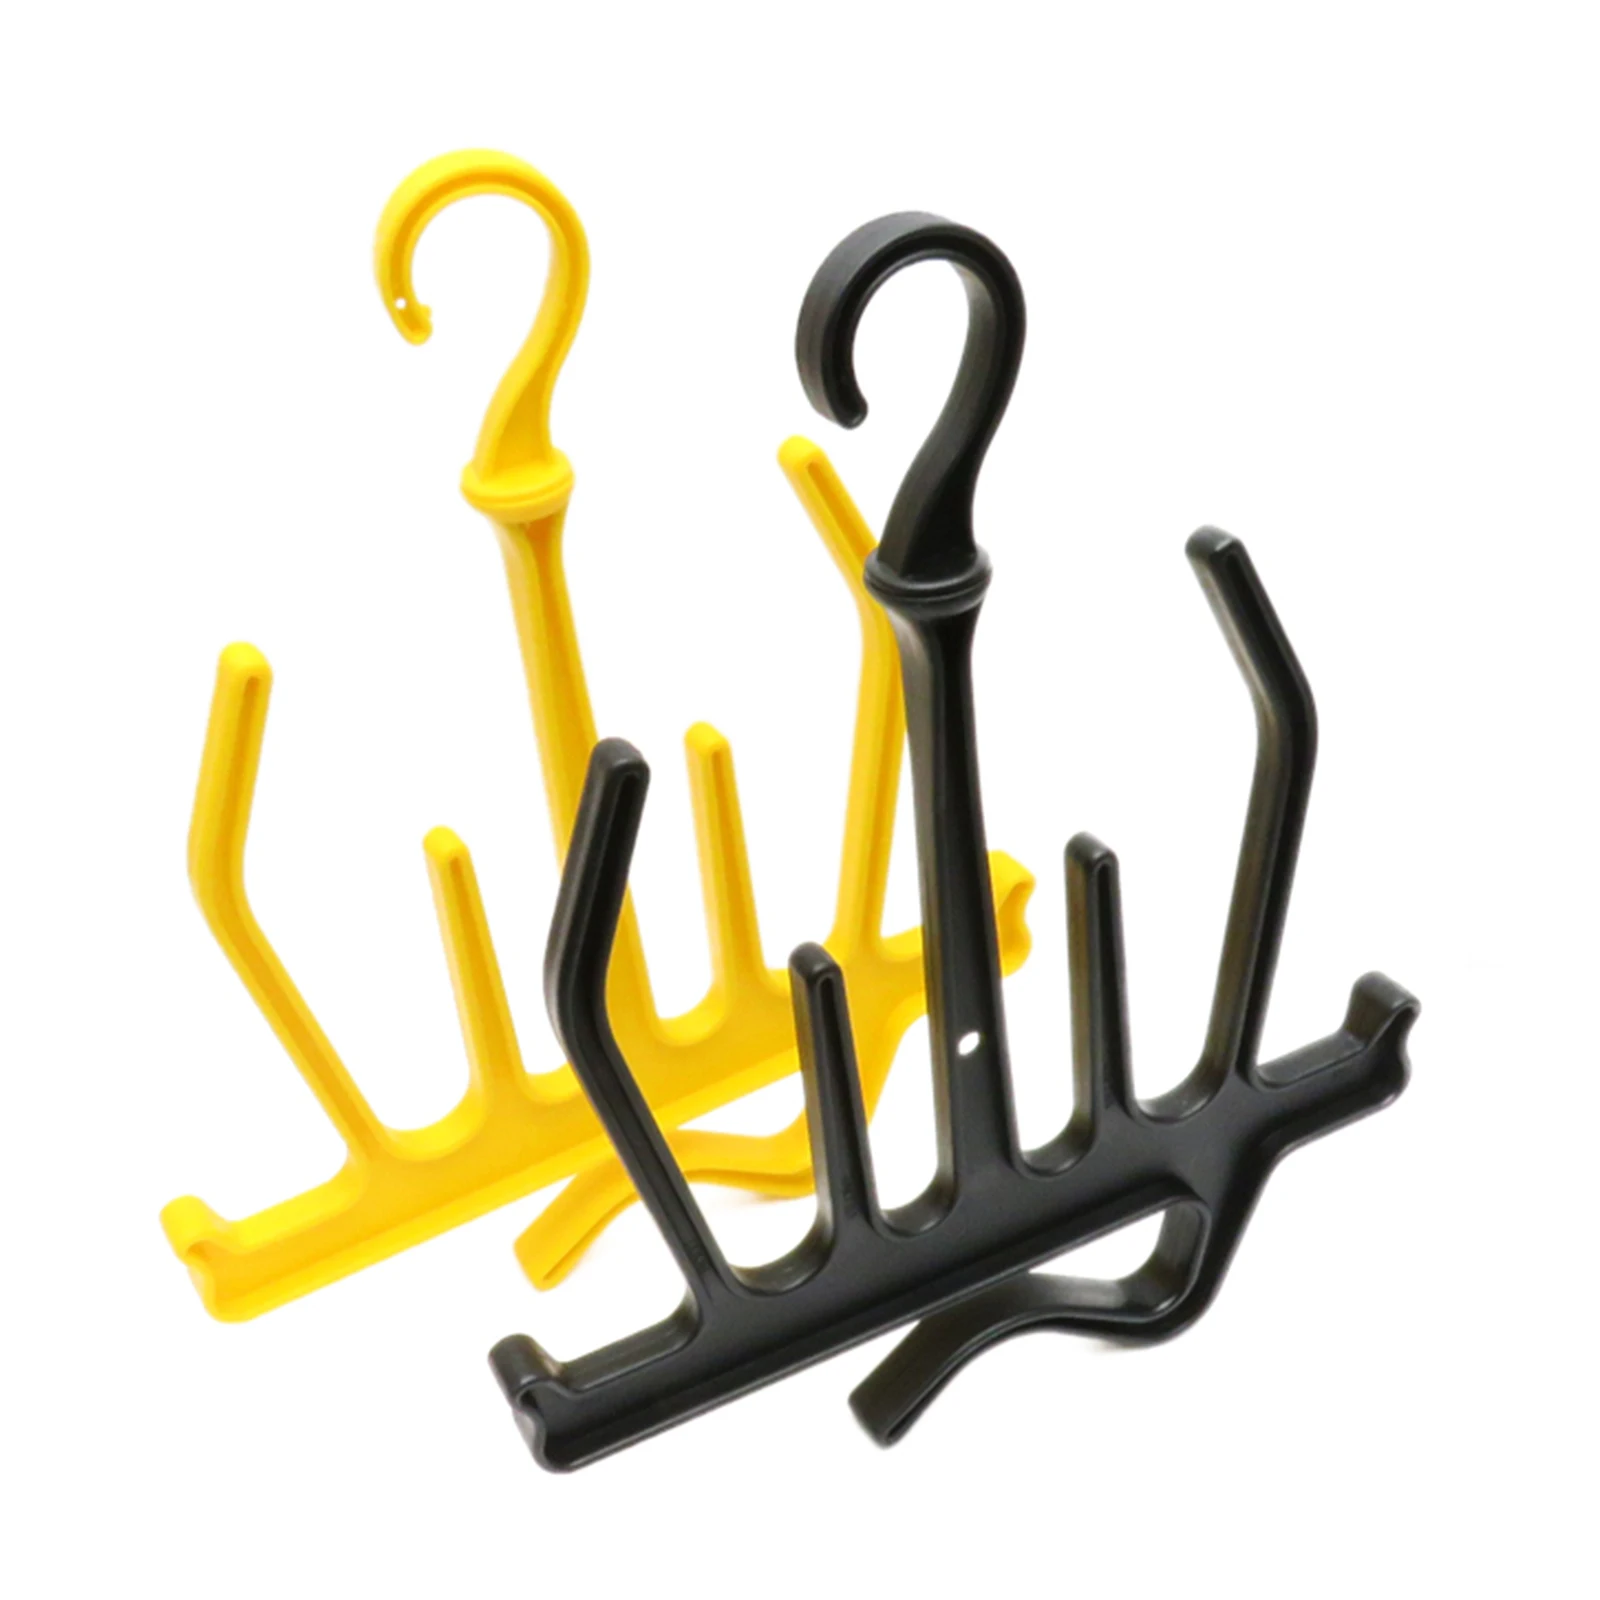 PP Diving Hanger Suit Boots Fast Drying Drain Hangers Surfing Wetsuit Gear Swimming Wetsuit Hanger Black/Yellow